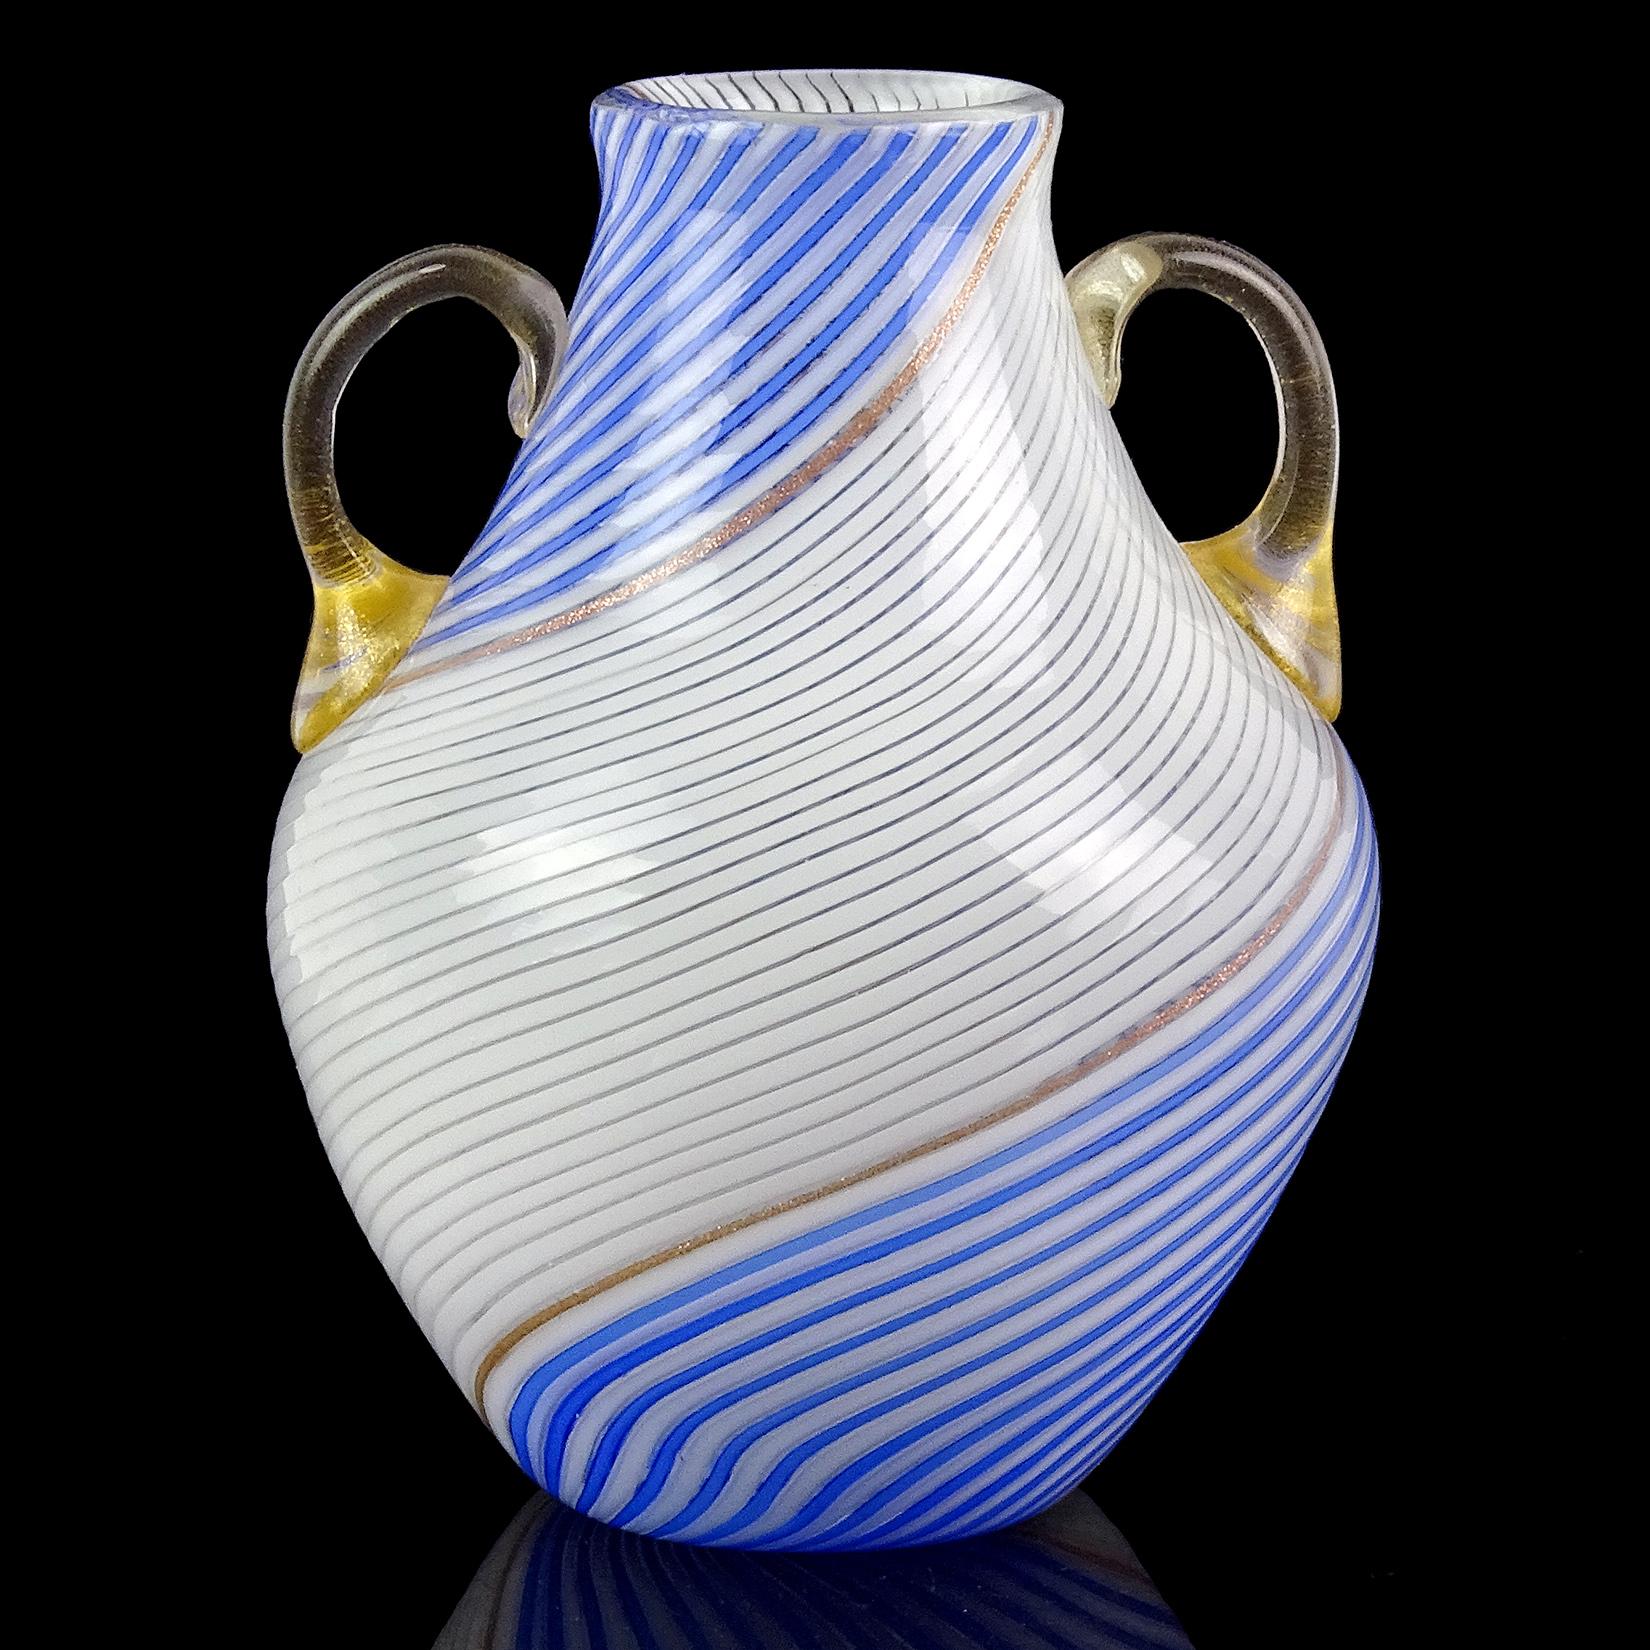 Beautiful vintage Murano hand blown white and blue ribbons Italian art glass flower vase. Documented to designer Dino Martens for Aureliano Toso. The vase has a ribbon of glittery copper aventurine dividing the colors. It also has double gold leaf